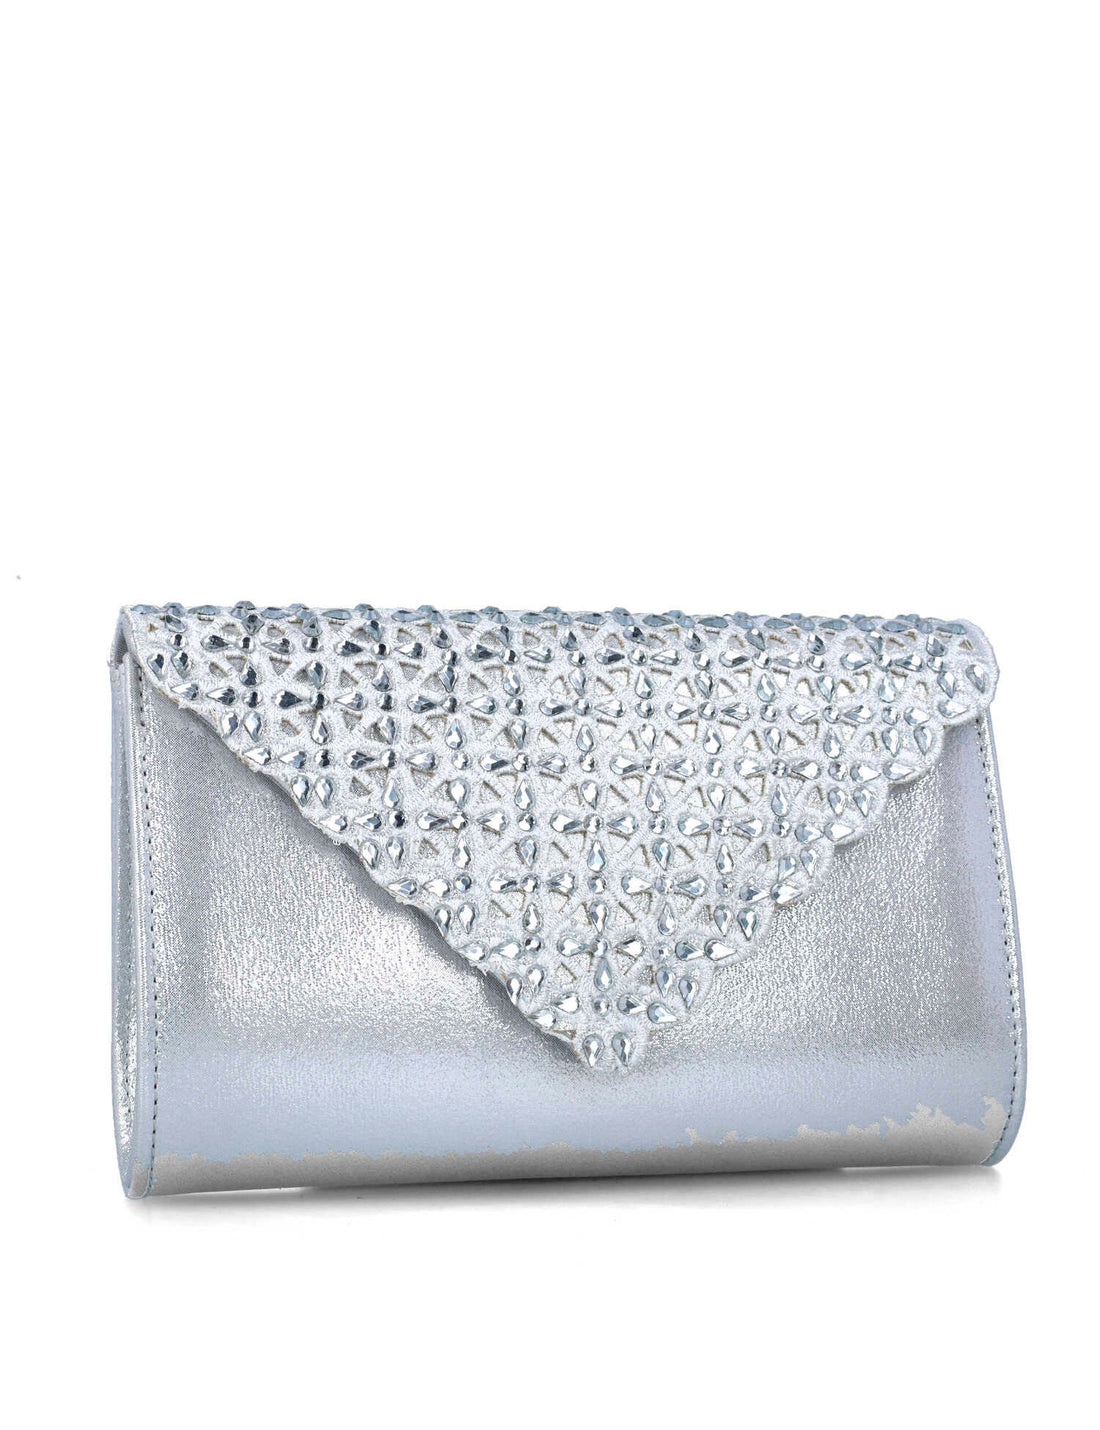 Silver Clutch With Embellished Flap_85540_09_02